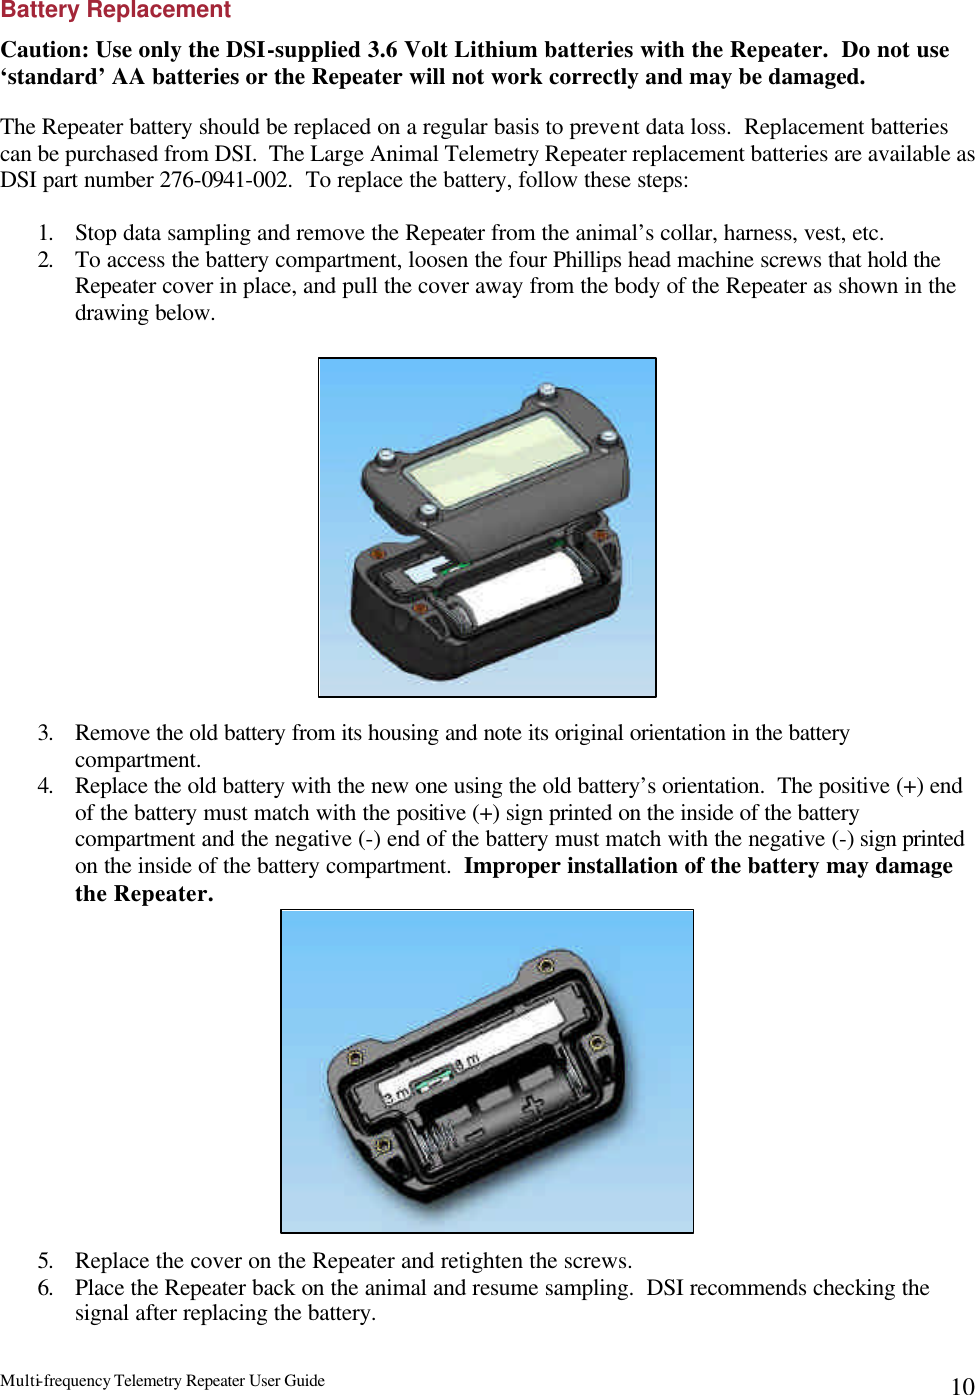 Multi-frequency Telemetry Repeater User Guide      10Battery Replacement Caution: Use only the DSI-supplied 3.6 Volt Lithium batteries with the Repeater.  Do not use ‘standard’ AA batteries or the Repeater will not work correctly and may be damaged.  The Repeater battery should be replaced on a regular basis to prevent data loss.  Replacement batteries can be purchased from DSI.  The Large Animal Telemetry Repeater replacement batteries are available as DSI part number 276-0941-002.  To replace the battery, follow these steps:  1. Stop data sampling and remove the Repeater from the animal’s collar, harness, vest, etc. 2. To access the battery compartment, loosen the four Phillips head machine screws that hold the Repeater cover in place, and pull the cover away from the body of the Repeater as shown in the drawing below.                  3. Remove the old battery from its housing and note its original orientation in the battery compartment. 4. Replace the old battery with the new one using the old battery’s orientation.  The positive (+) end of the battery must match with the positive (+) sign printed on the inside of the battery compartment and the negative (-) end of the battery must match with the negative (-) sign printed on the inside of the battery compartment.  Improper installation of the battery may damage the Repeater.              5. Replace the cover on the Repeater and retighten the screws. 6. Place the Repeater back on the animal and resume sampling.  DSI recommends checking the signal after replacing the battery.   